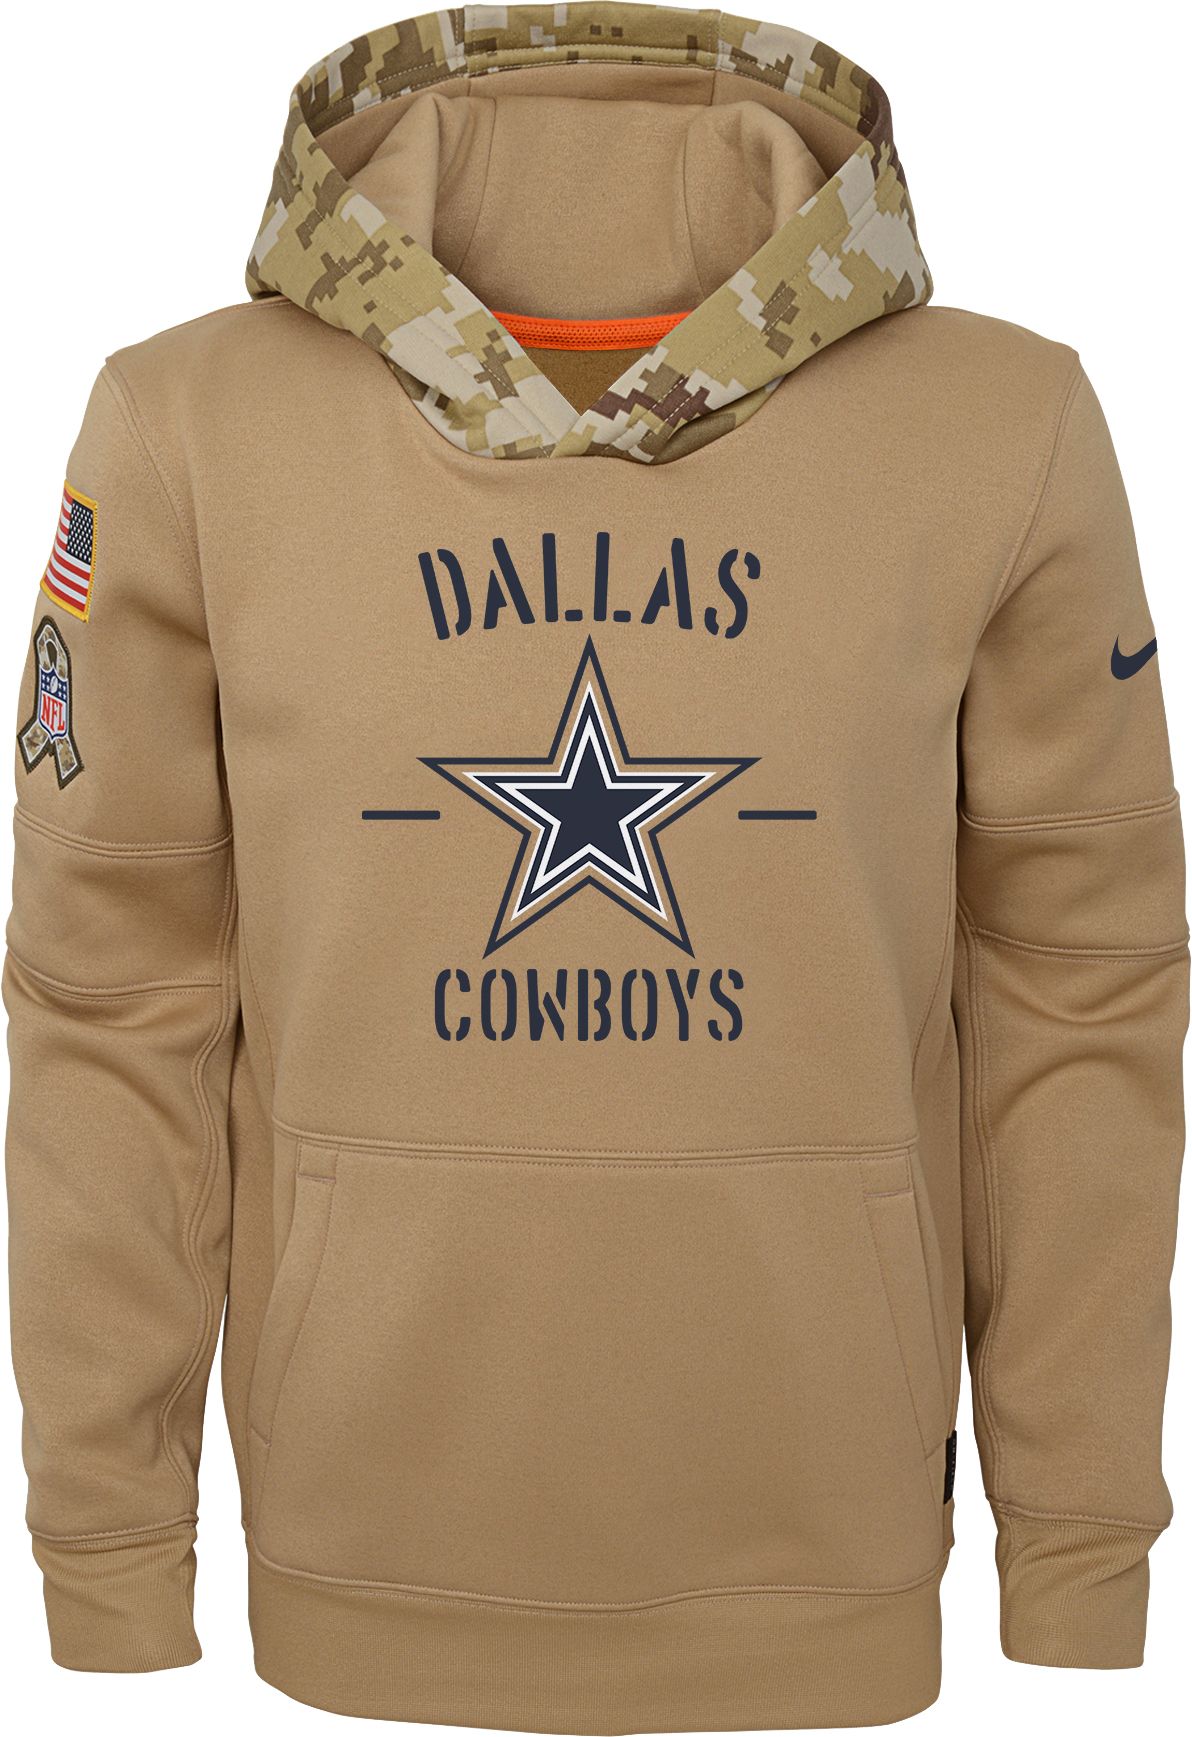 where can i buy a dallas cowboys hoodie